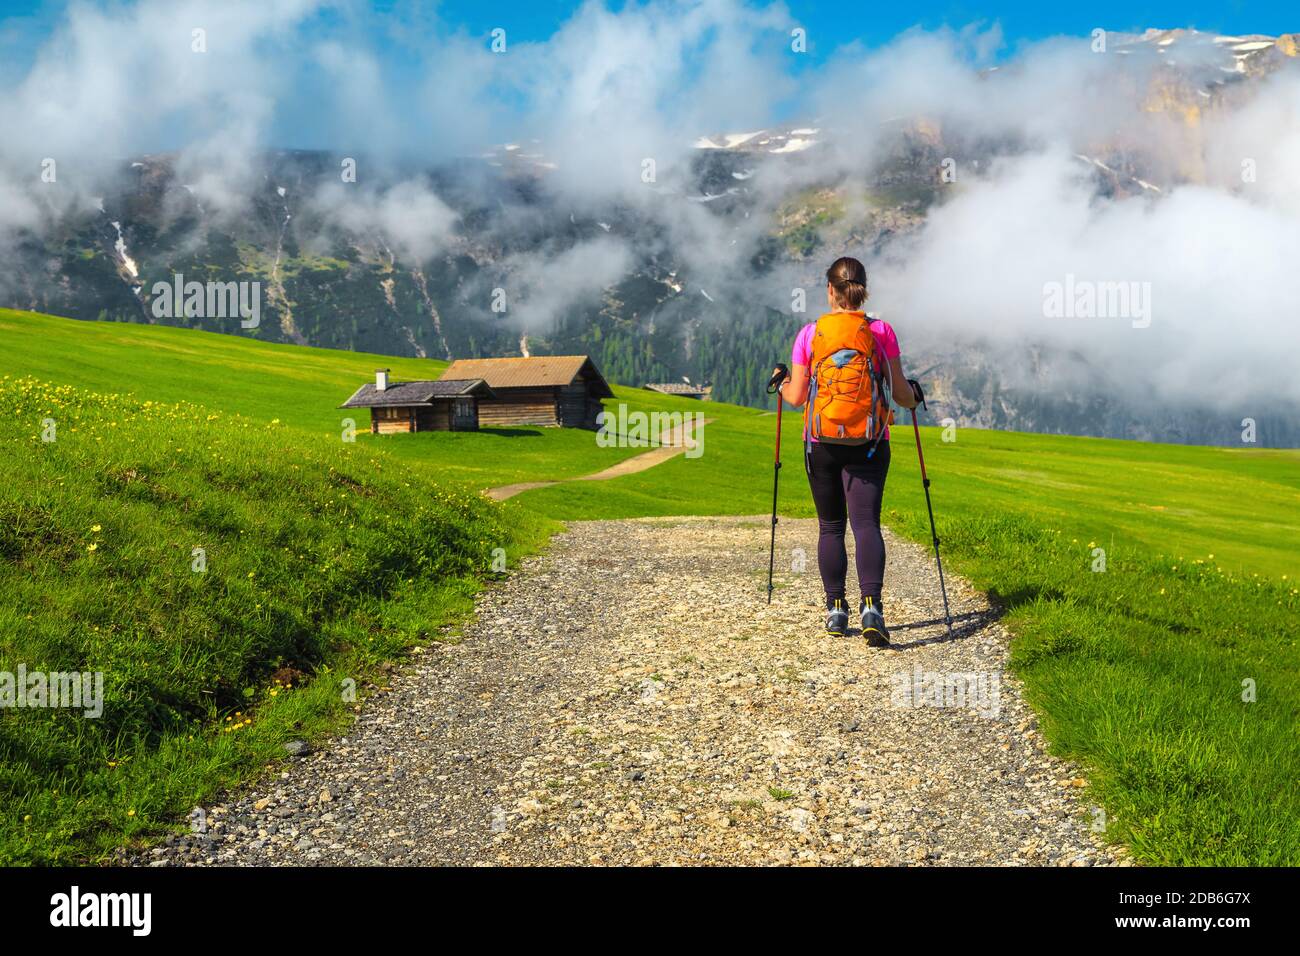 Hiking trail with wooden huts. Sporty backpacker hiker woman walking on the path in the mountains, Alpe di Siusi, Dolomites, Italy, Europe Stock Photo